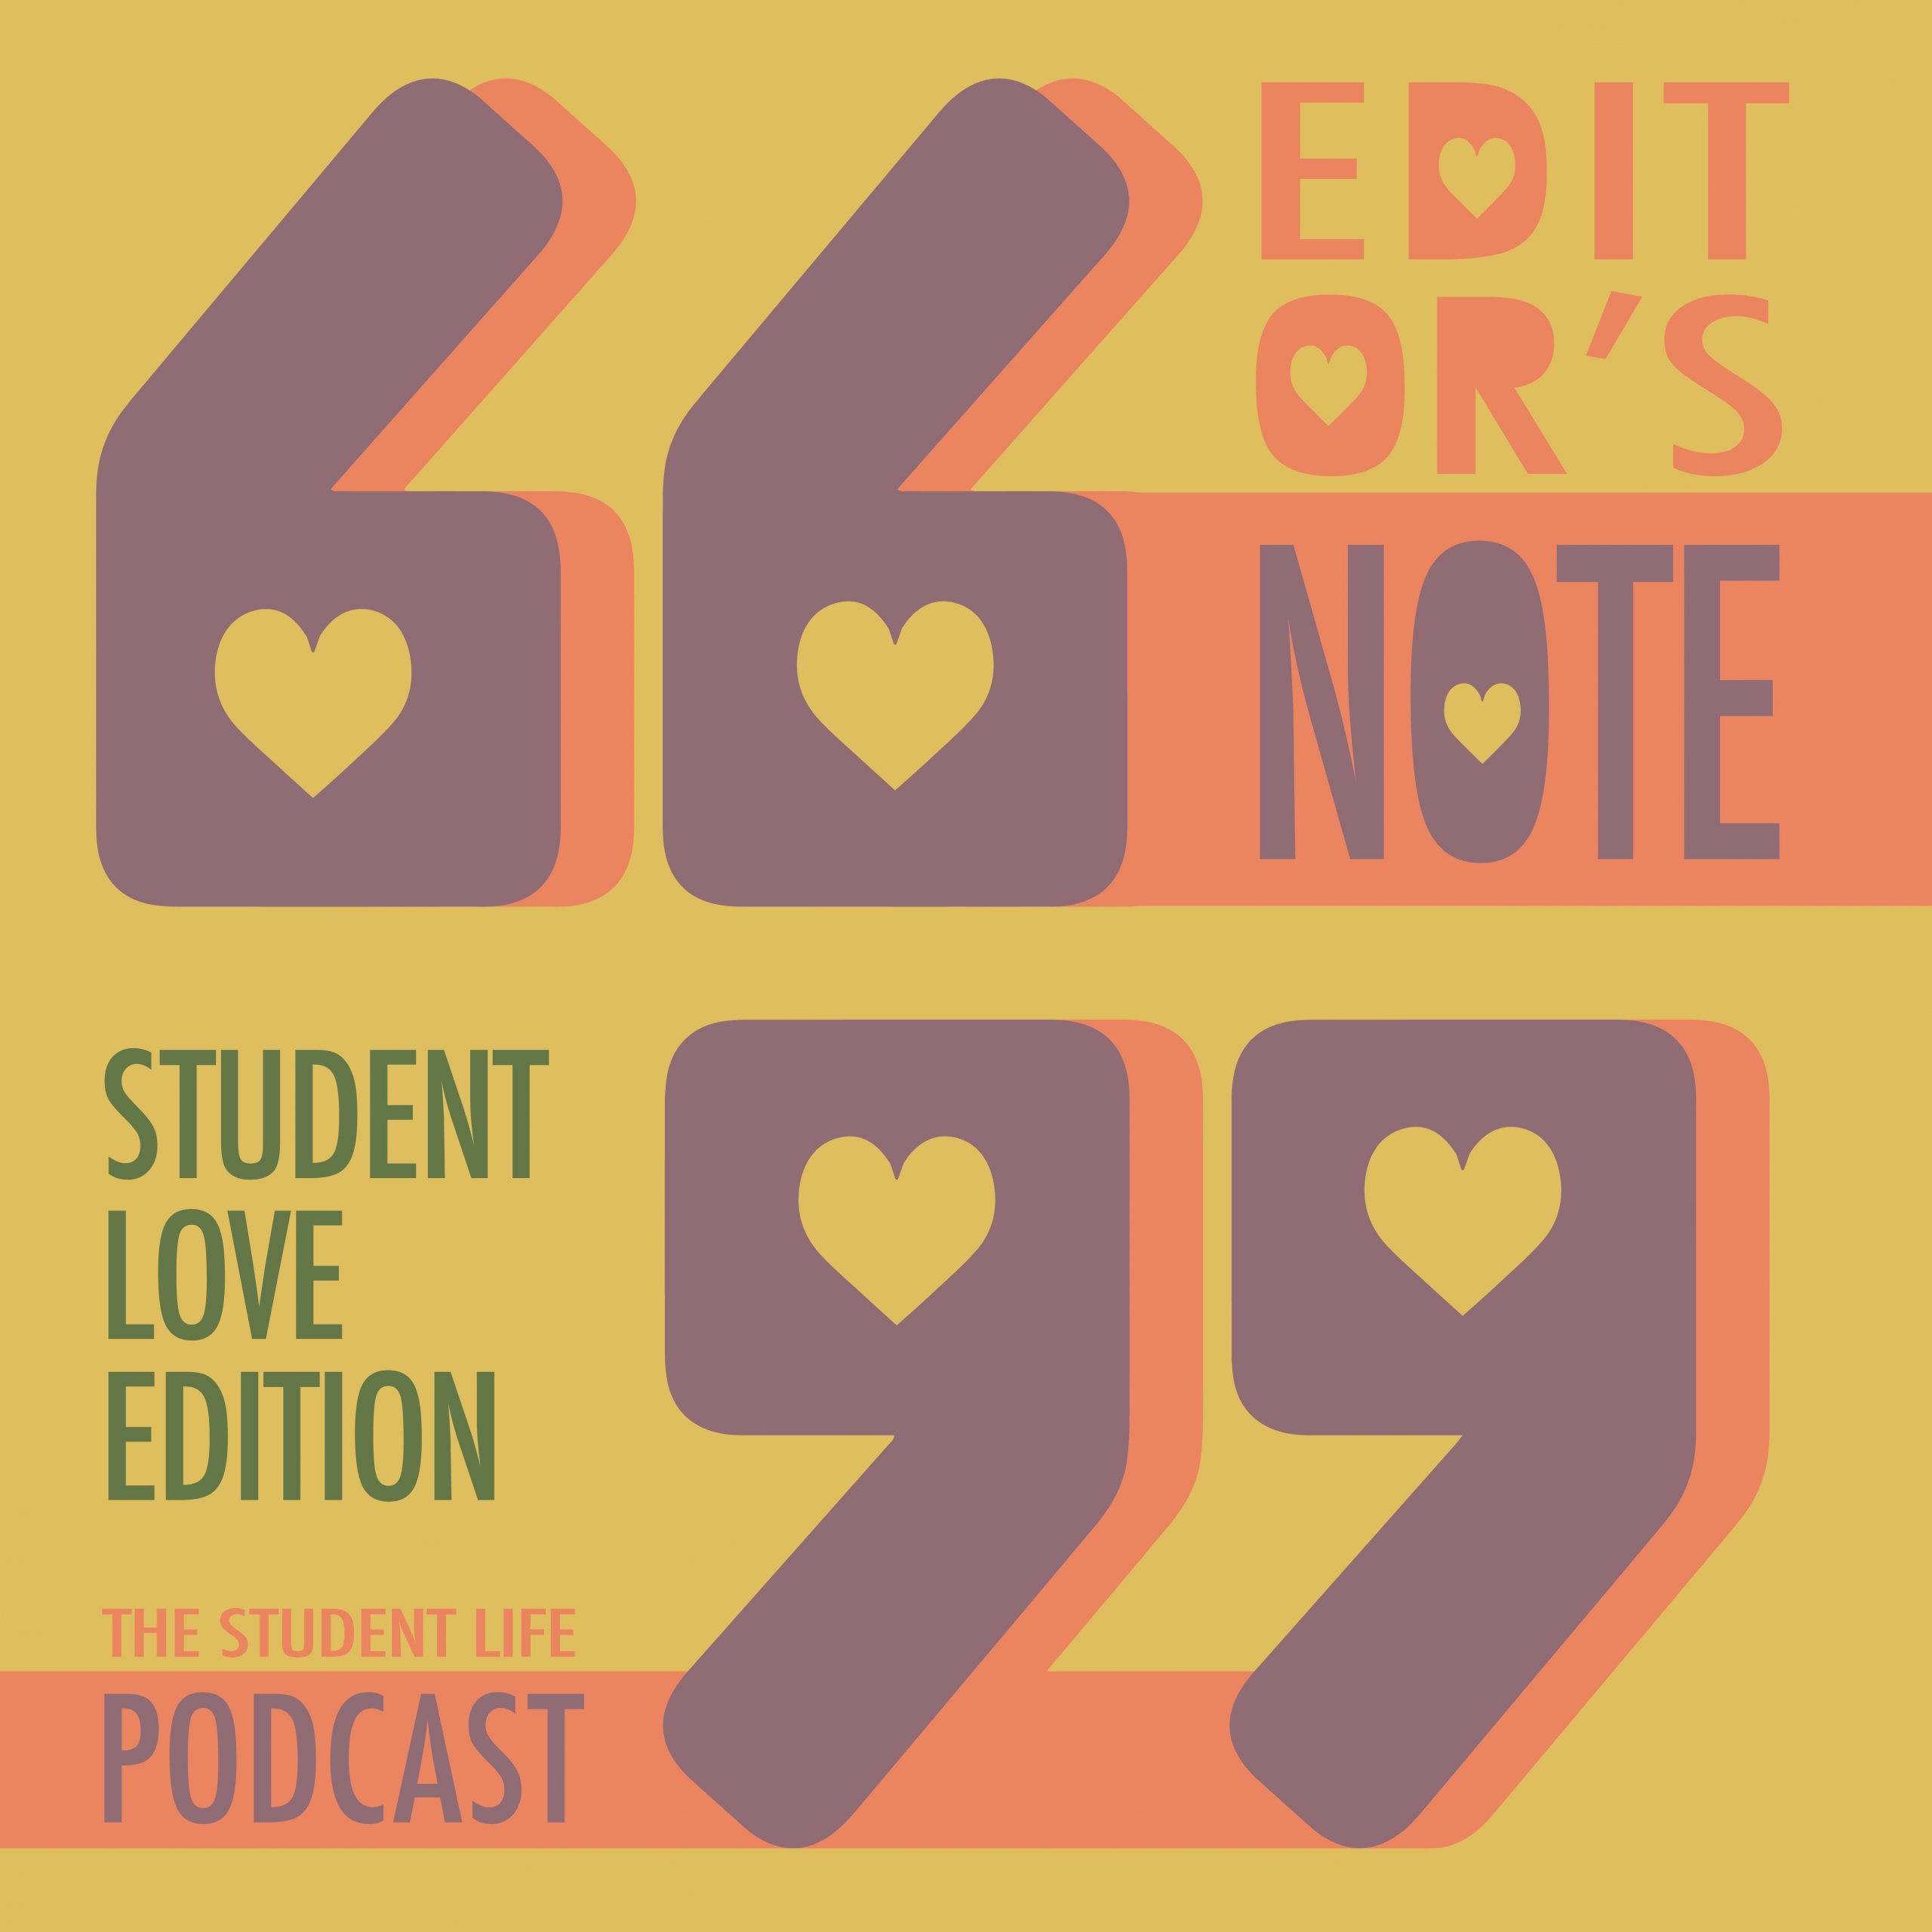 A graphic with two large purple quotation marks in the center in front of a yellow background. In the upper right hand corner, orange and purple letters read "Editor's Note." In the lower left hand corner, purple letters read "Student Love Edition and "The Student Life Podcast."